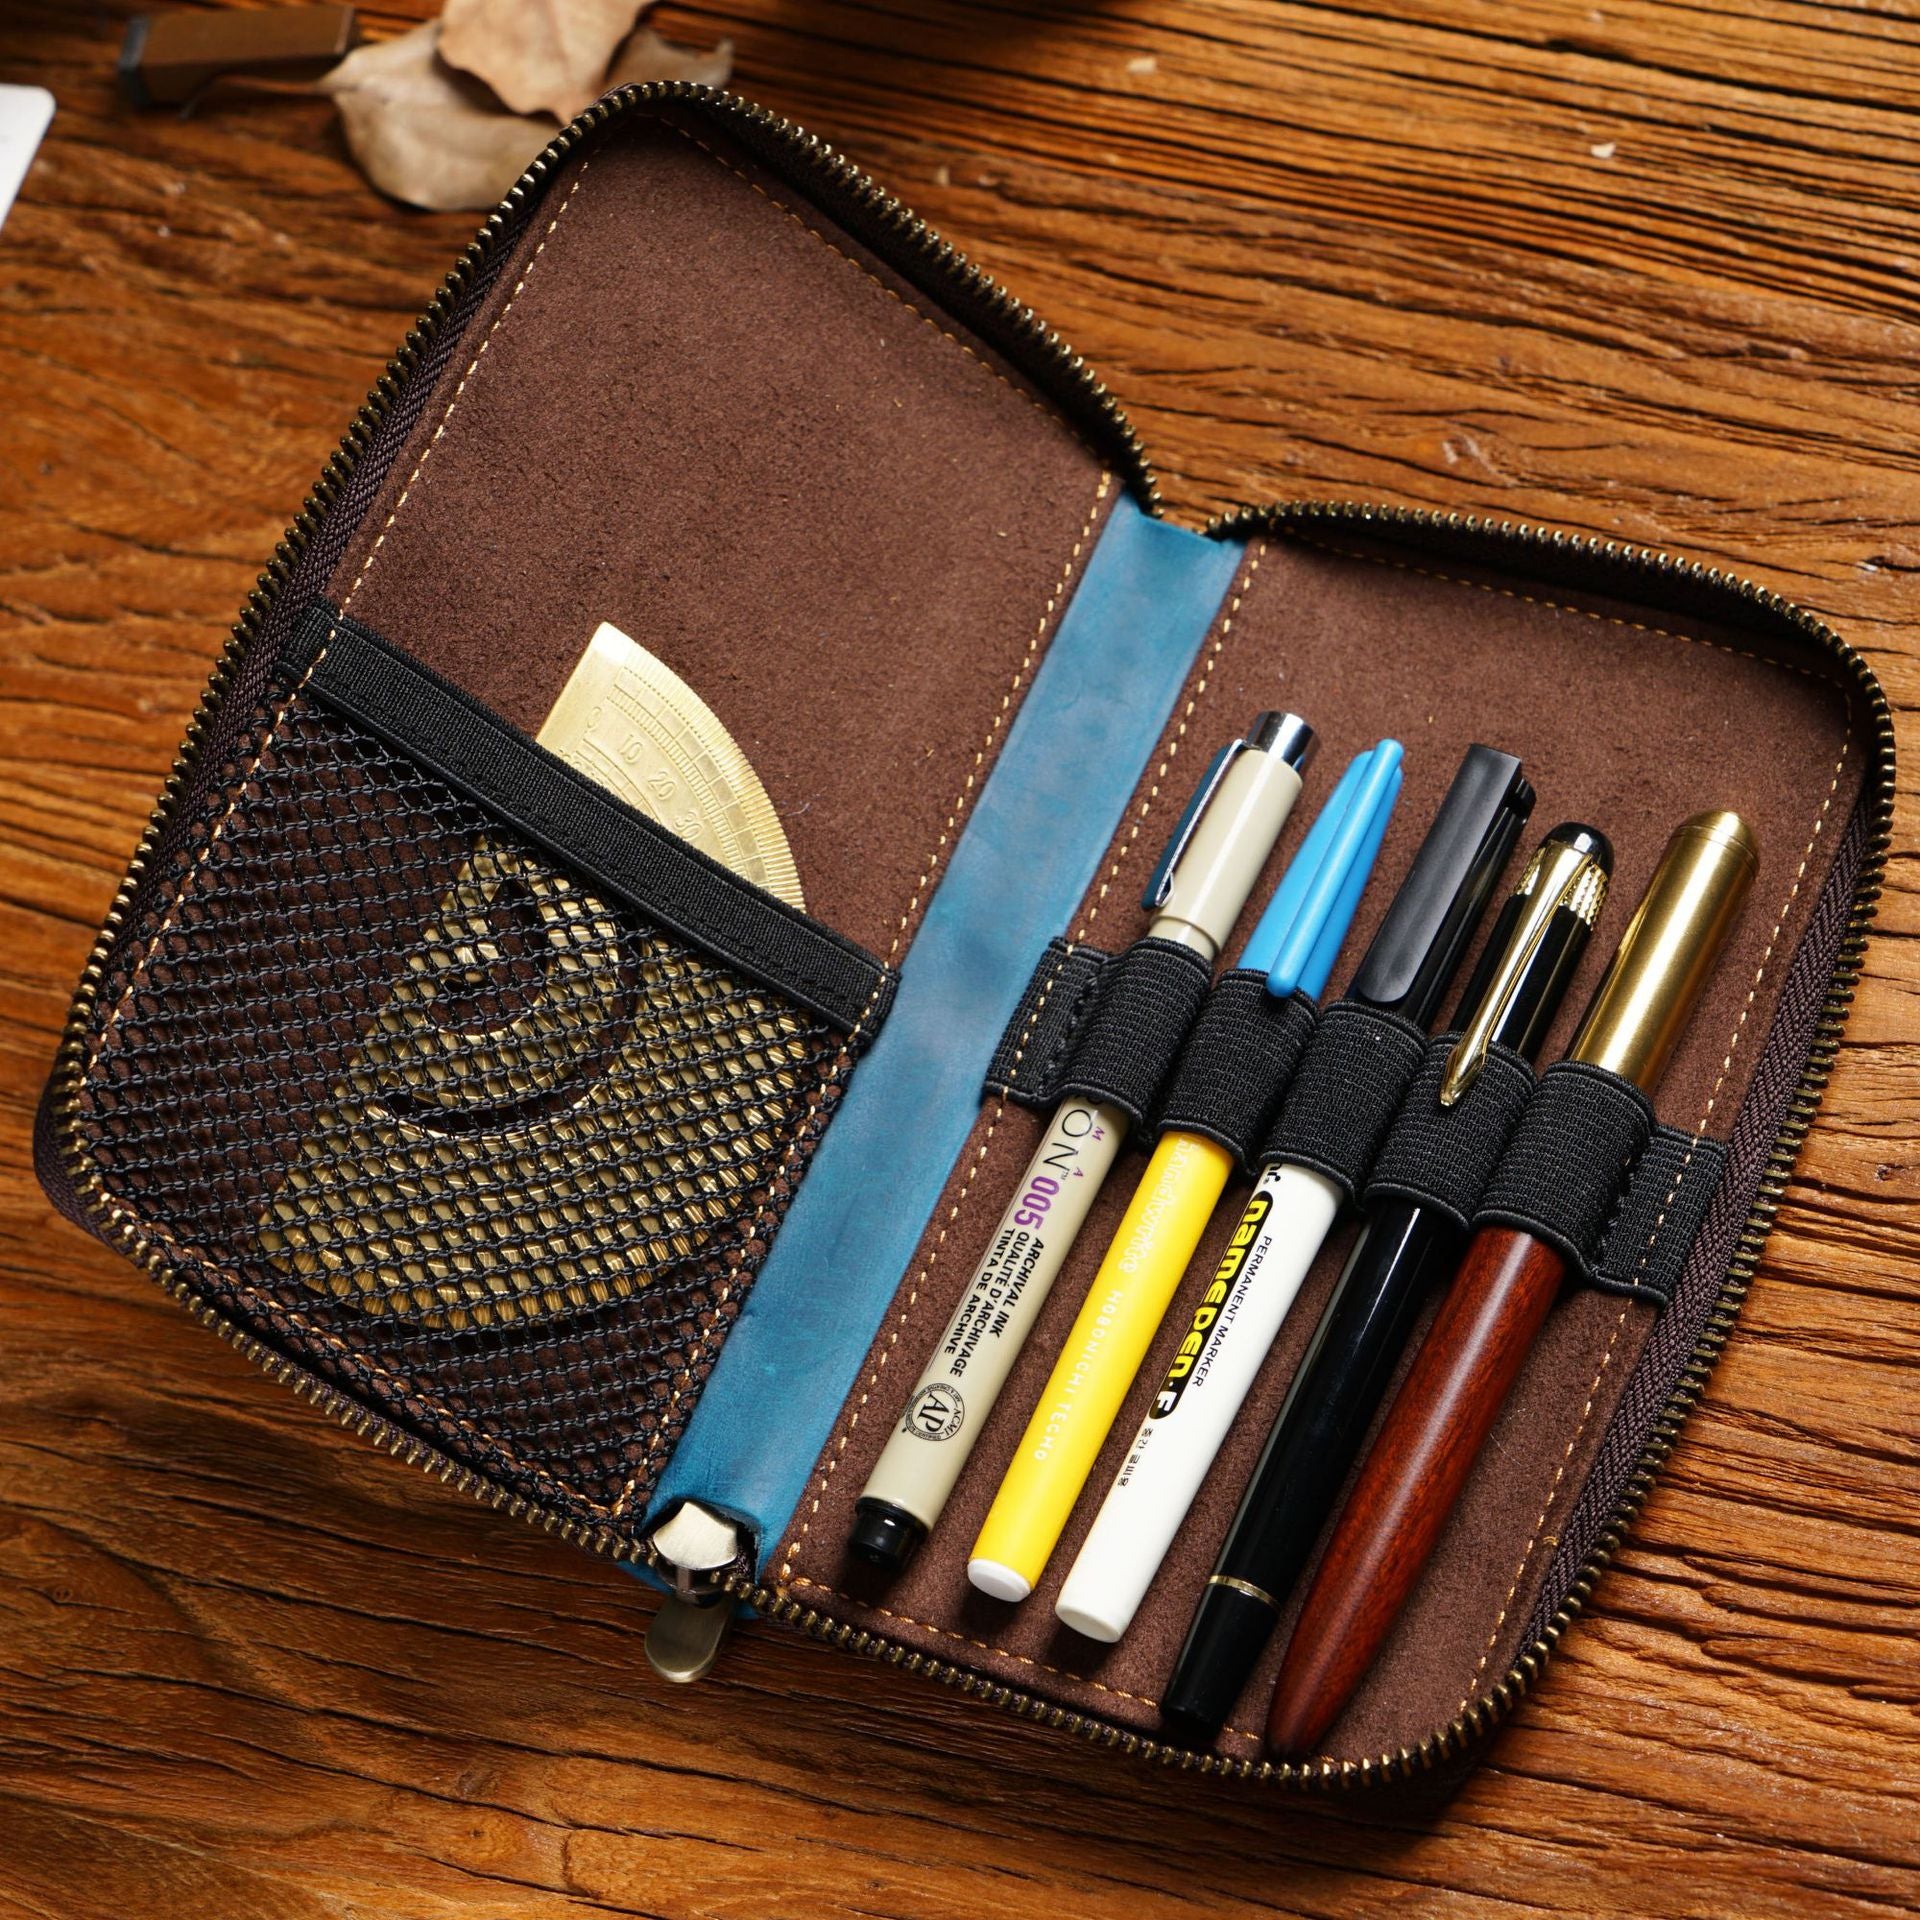 Leather Zippered Pen Organizer Case with 5 Slots and Net Holder - TTpen